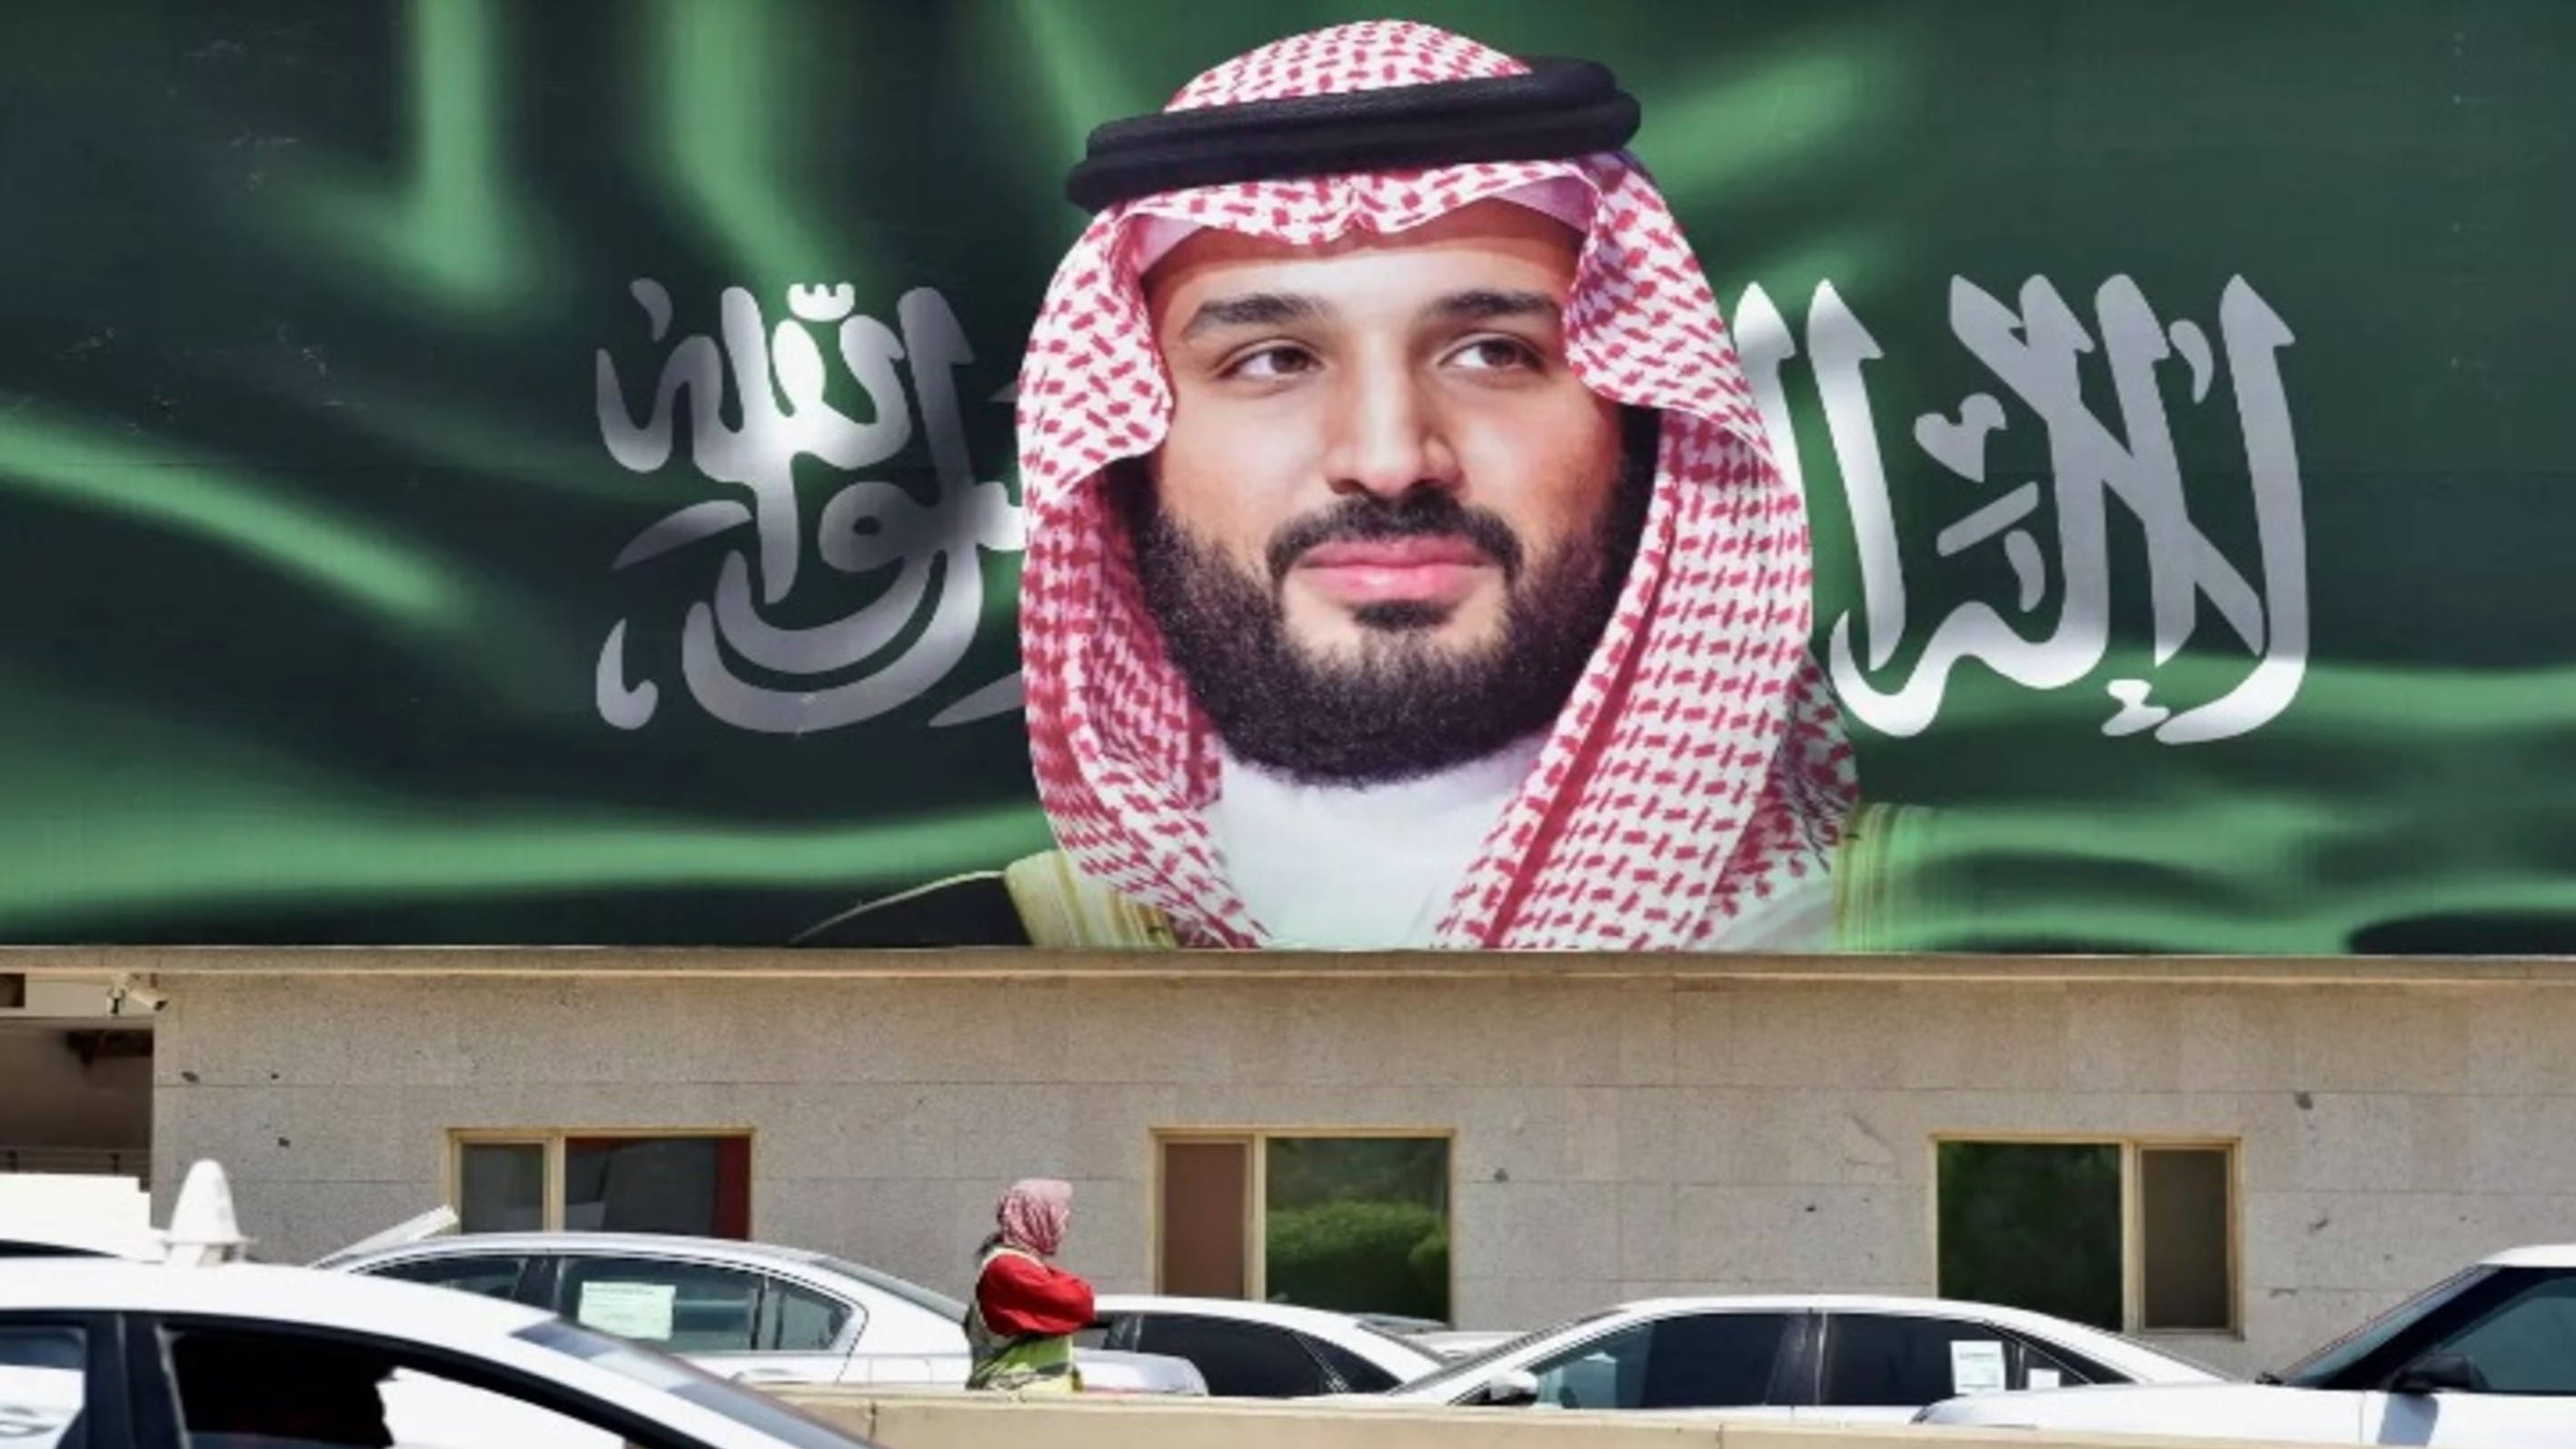 The West Has Allowed Saudi Arabia To Get Away With Murder For Too Long